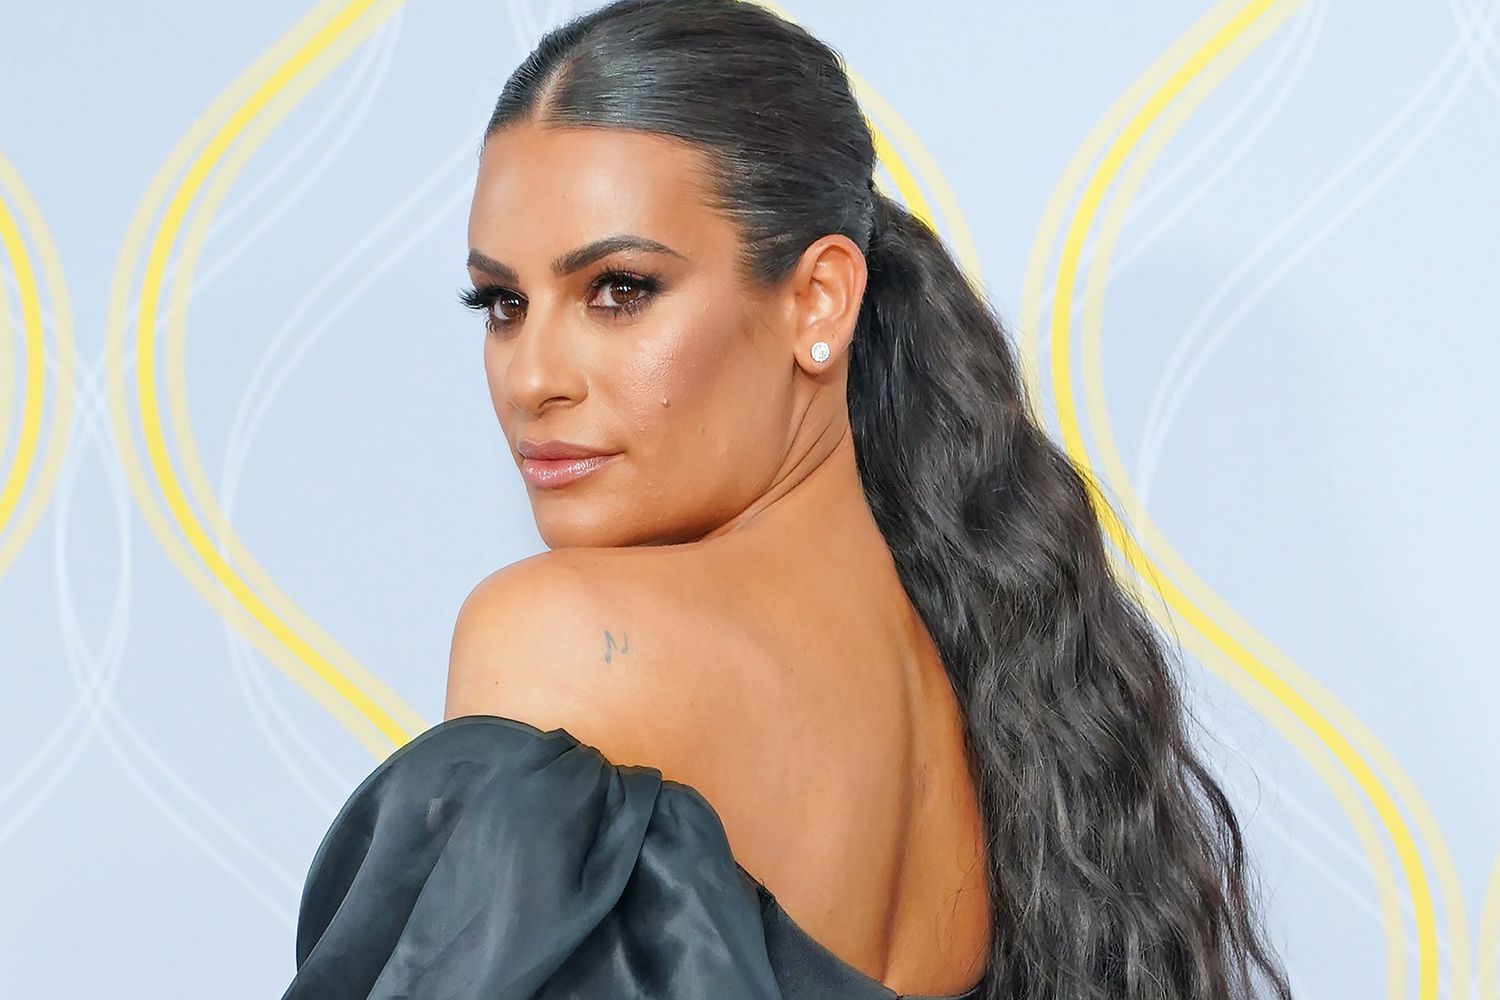 Lea Michele addresses backlash from ‘Glee’ costars, says she’s done personal reach-outs – Entertainment Weekly News